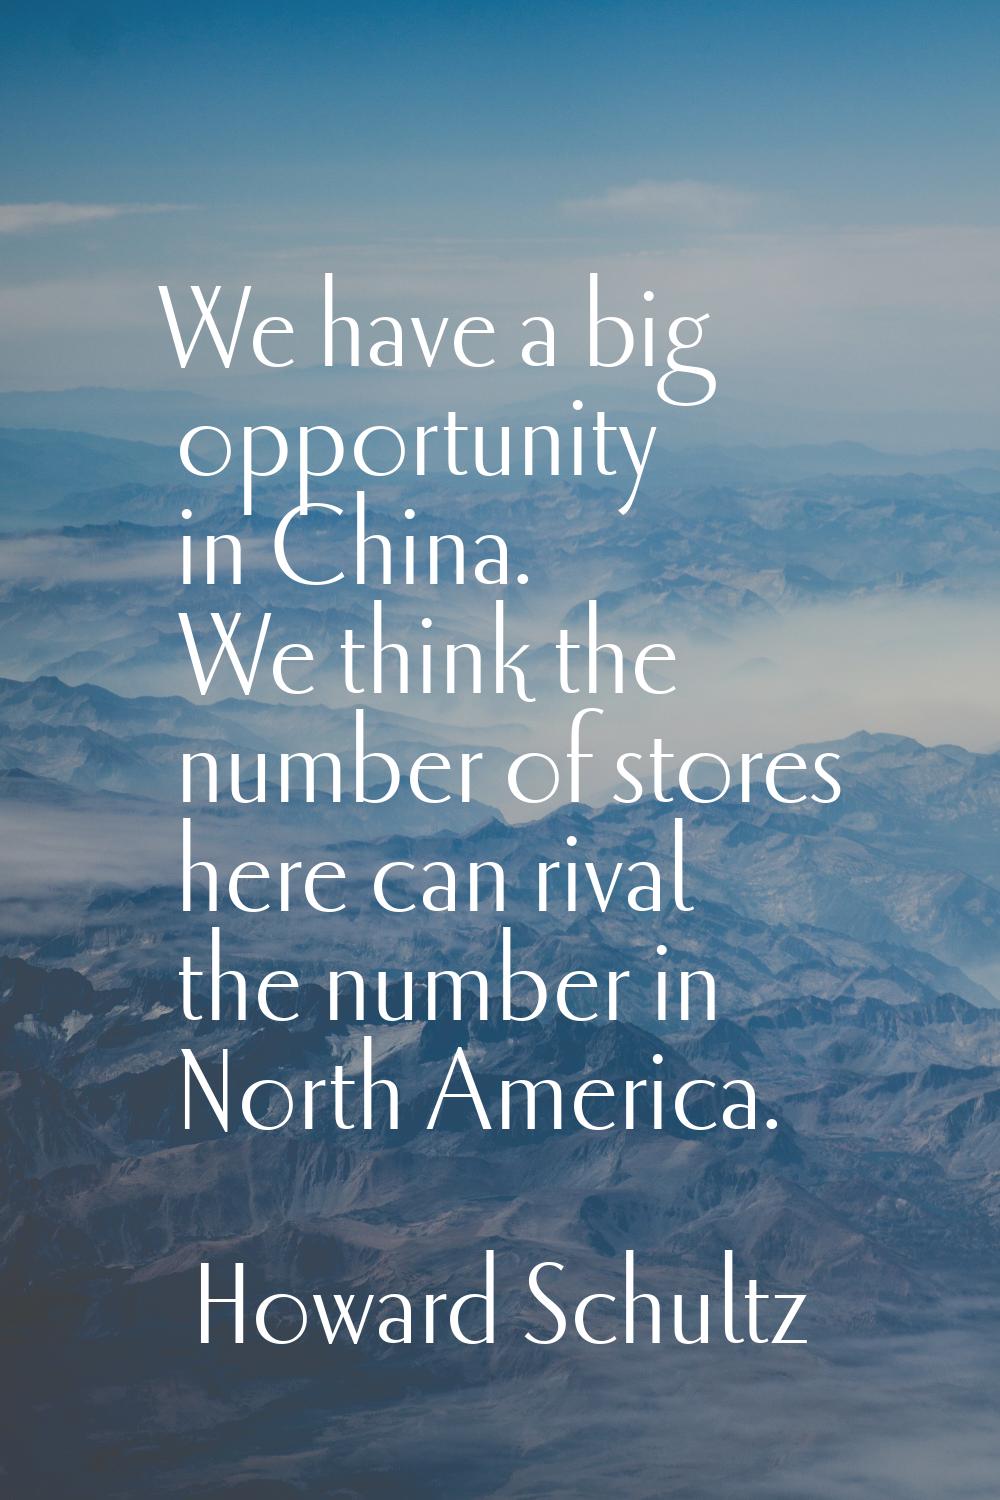 We have a big opportunity in China. We think the number of stores here can rival the number in Nort